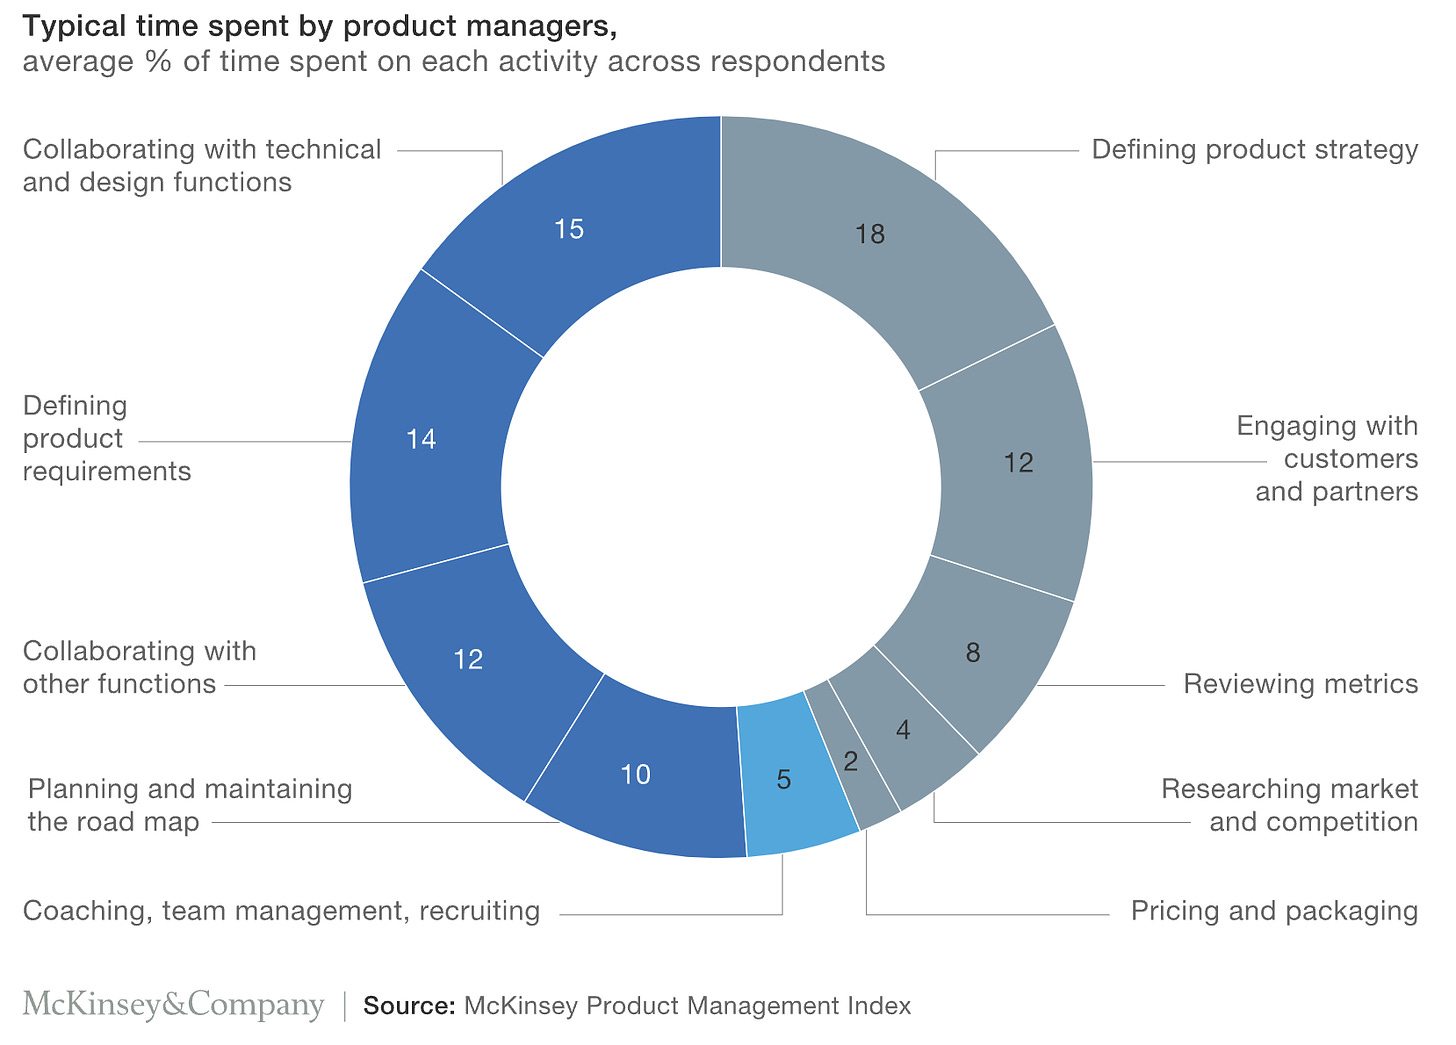 Chart of typical time spent by product managers